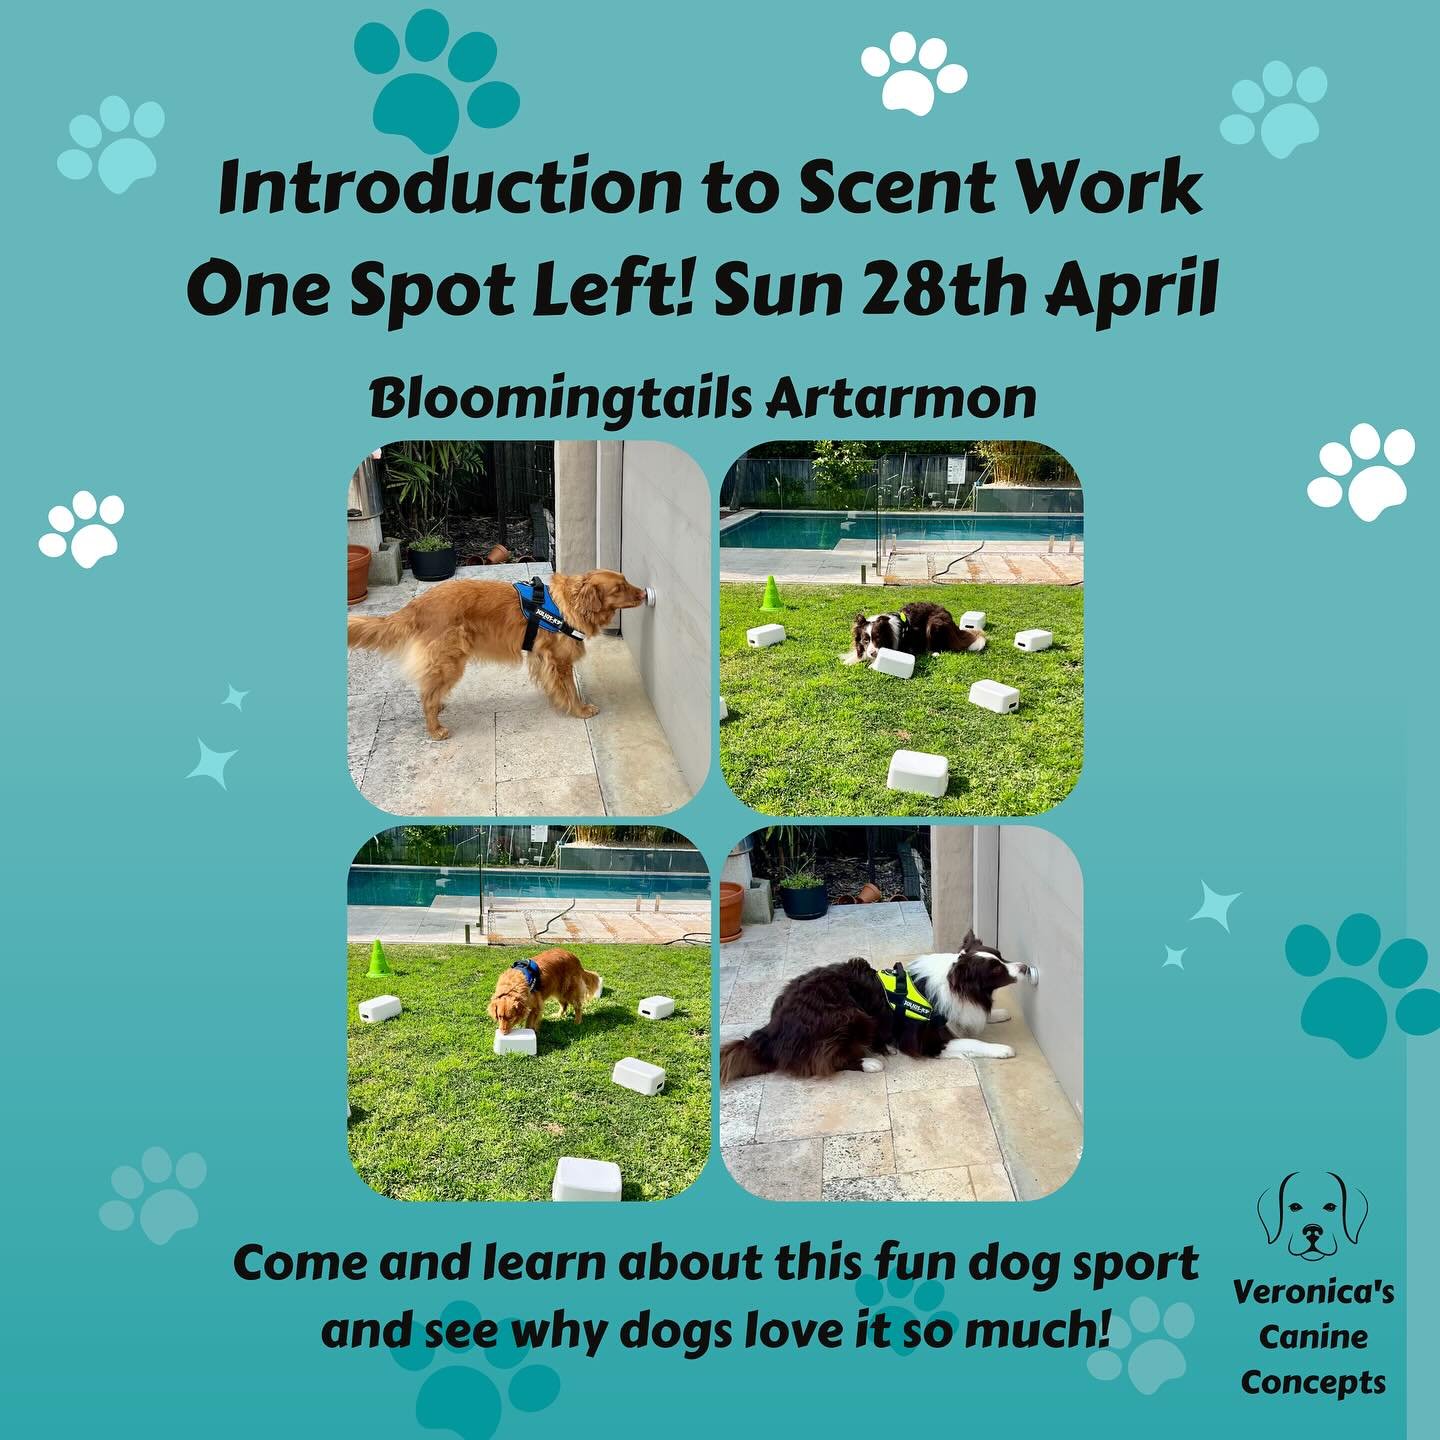 Booking are open for April/May classes with limited spots remaining!

28th April at @bloomingtails_dog_grooming Artarmon Introduction to Scentwork (foundations class) 1 spot left

Tues 7th May at @pittwateranimalhospital Follow-on Scentwork class (if